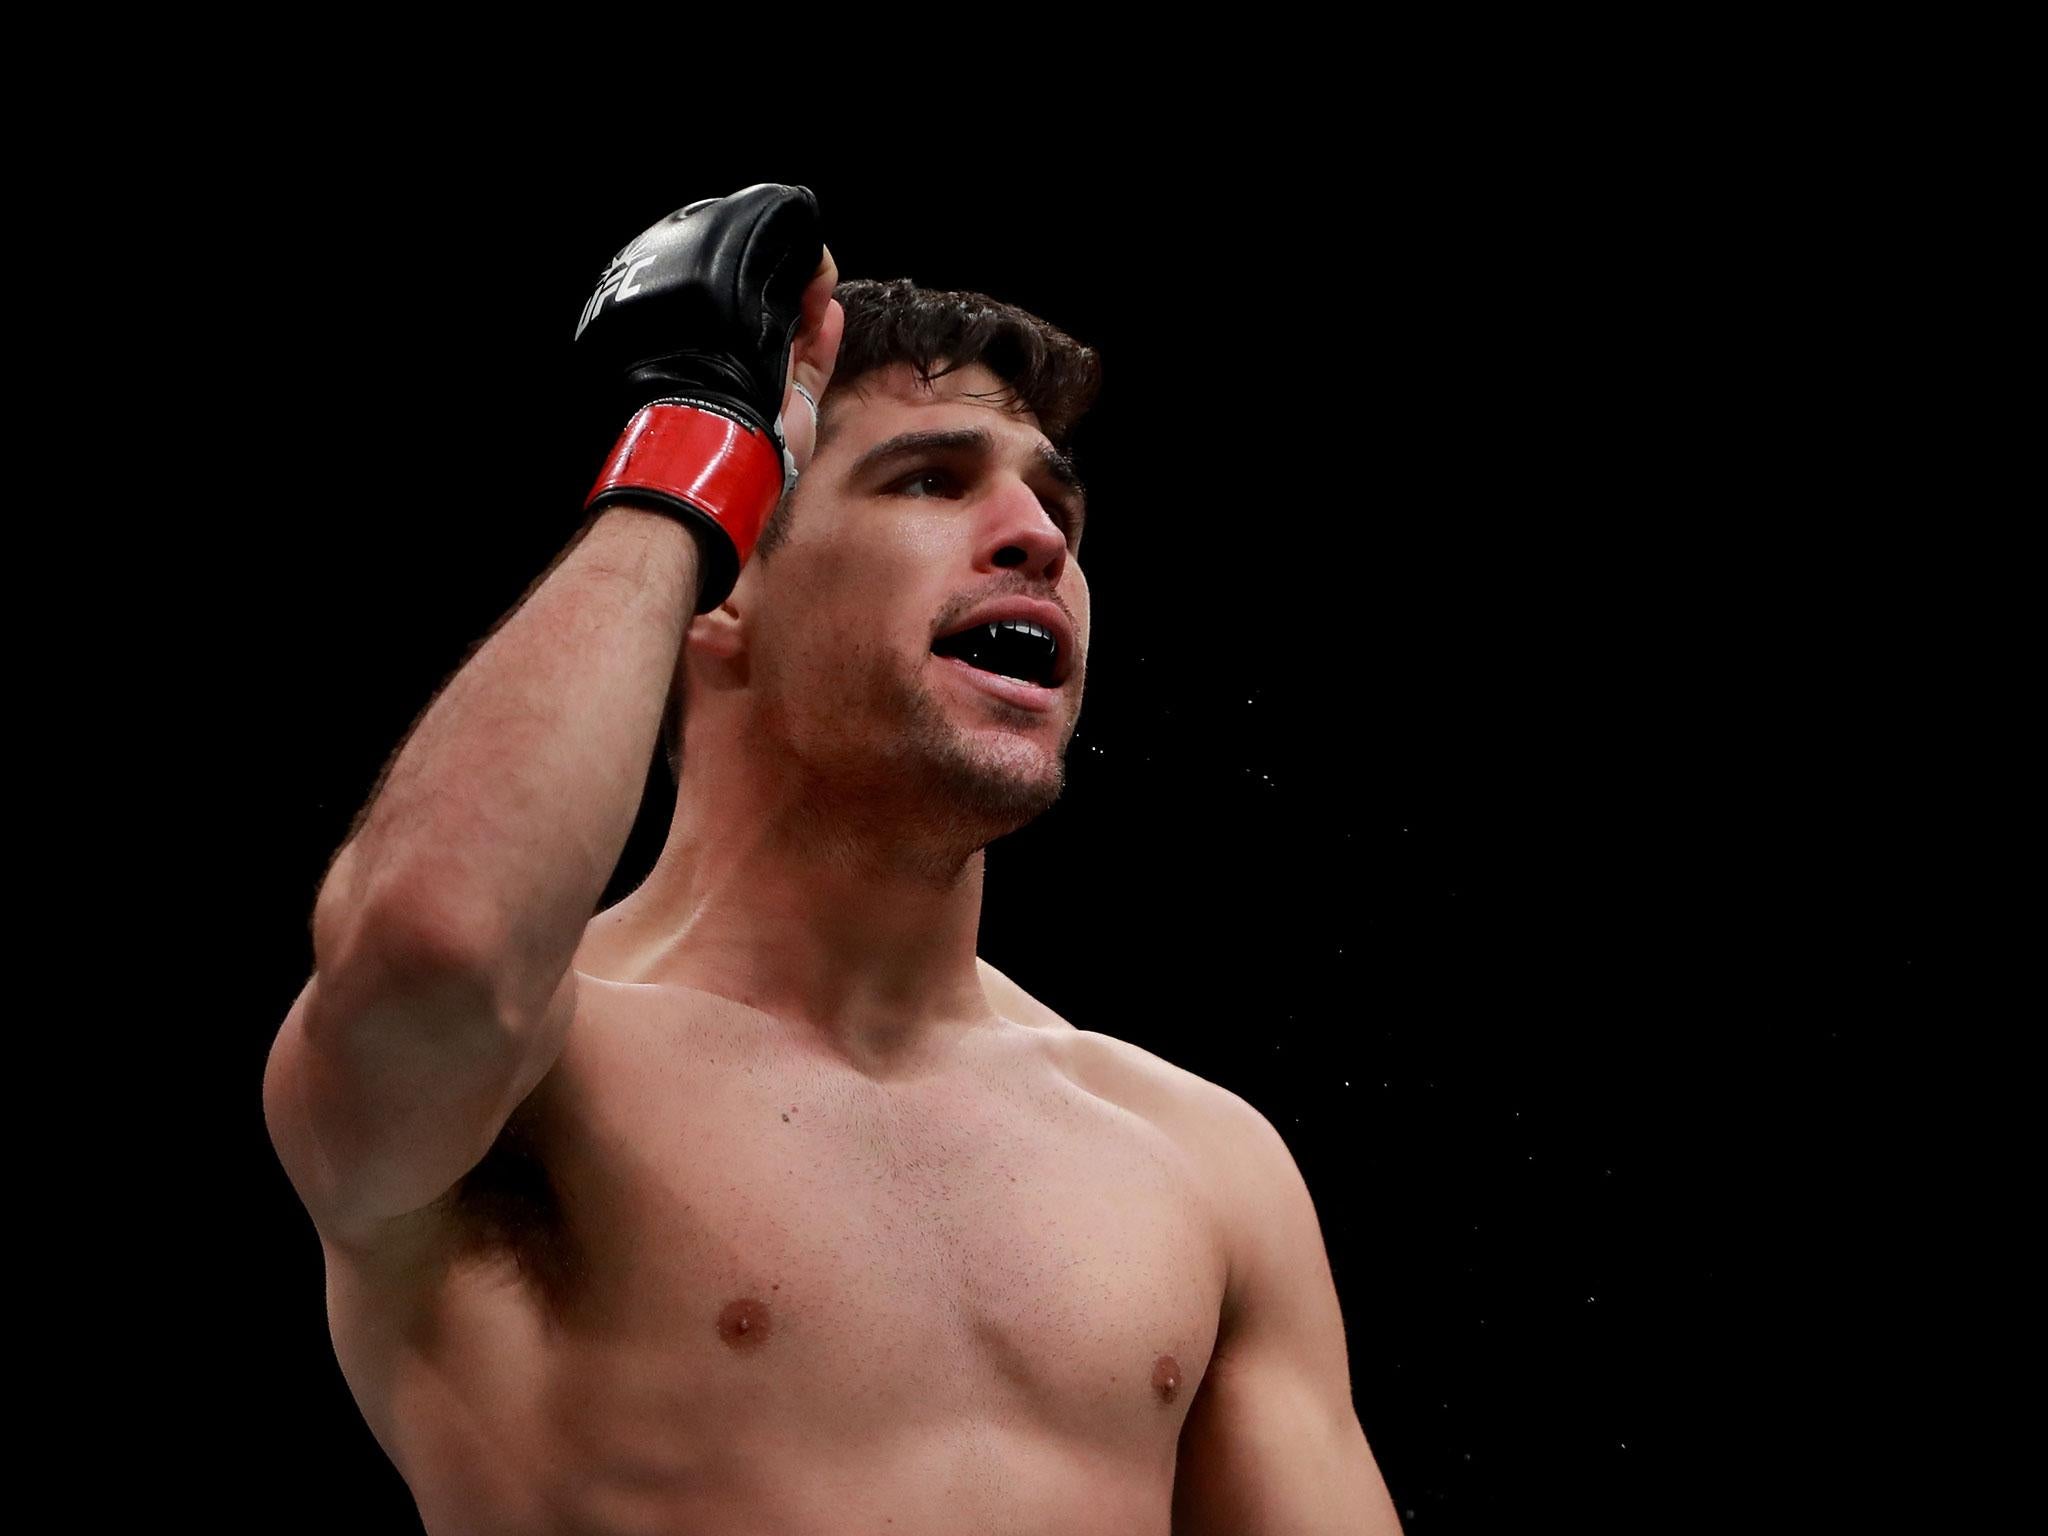 Vicente Luque seeks a second win over Belal Muhammad in their rematch this weekend